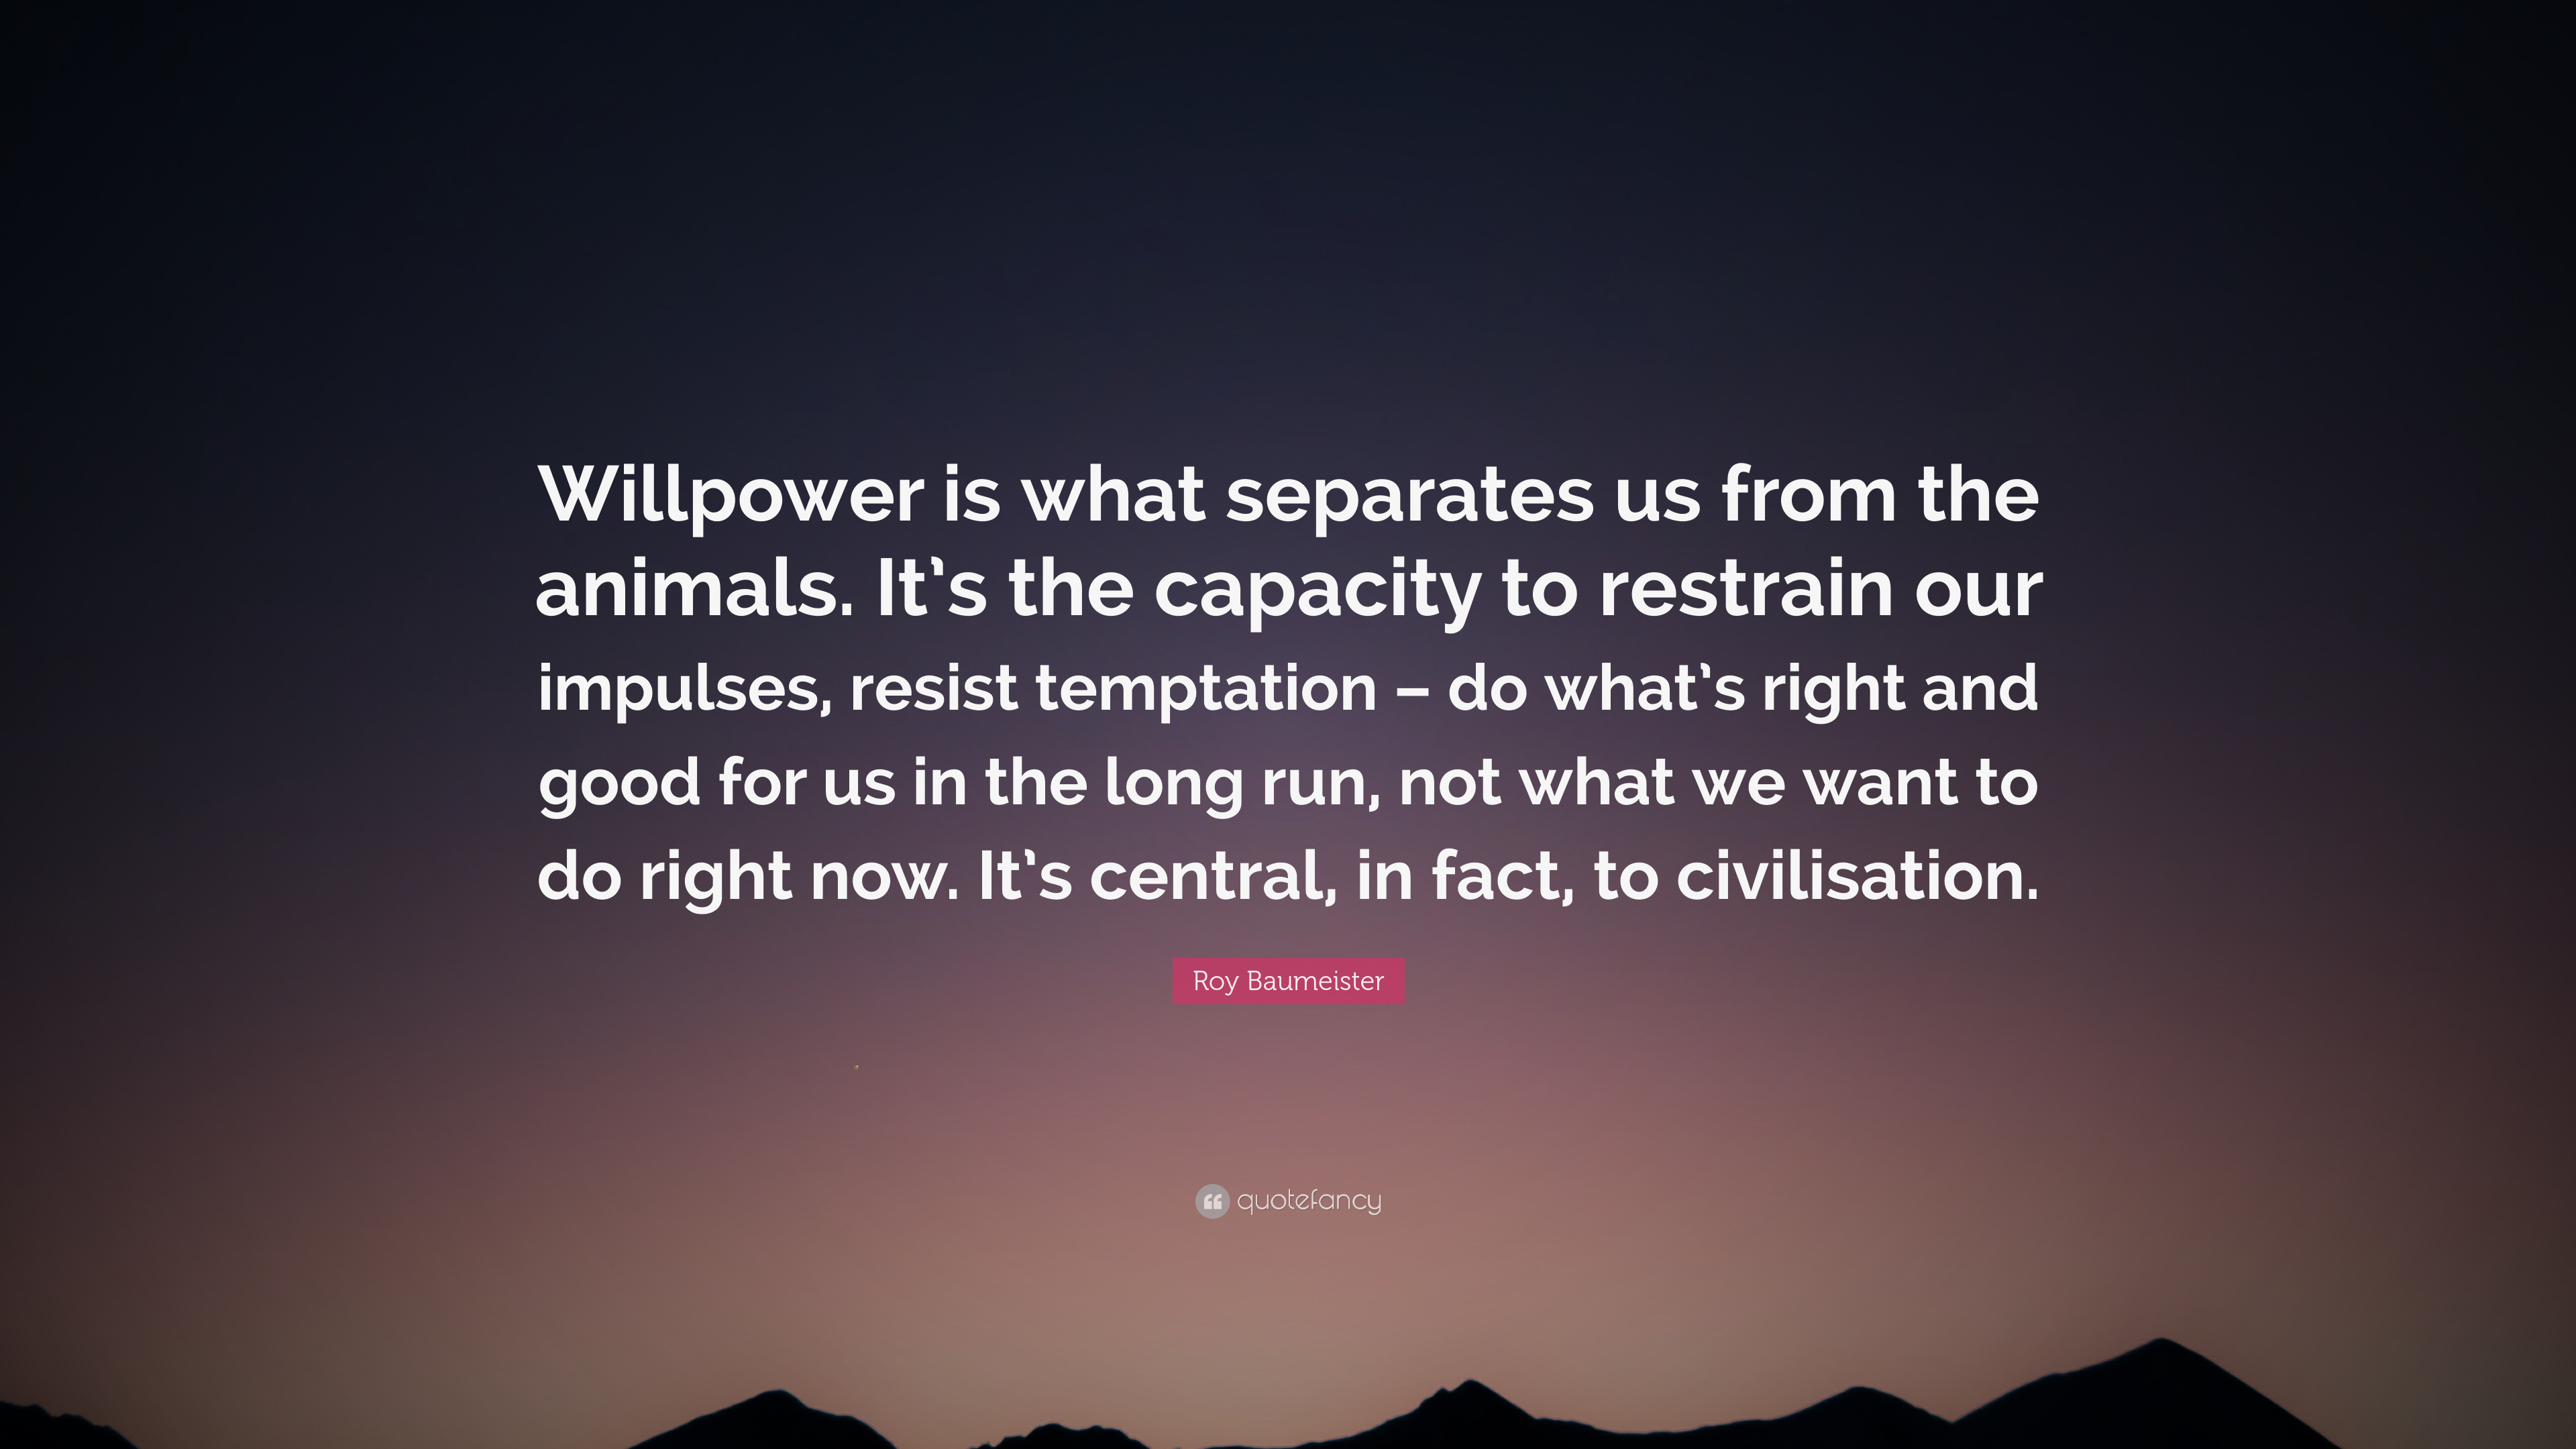 Roy Baumeister Quote: “Willpower is what separates us from the animals. It's the capacity to restrain our impulses, resist temptation